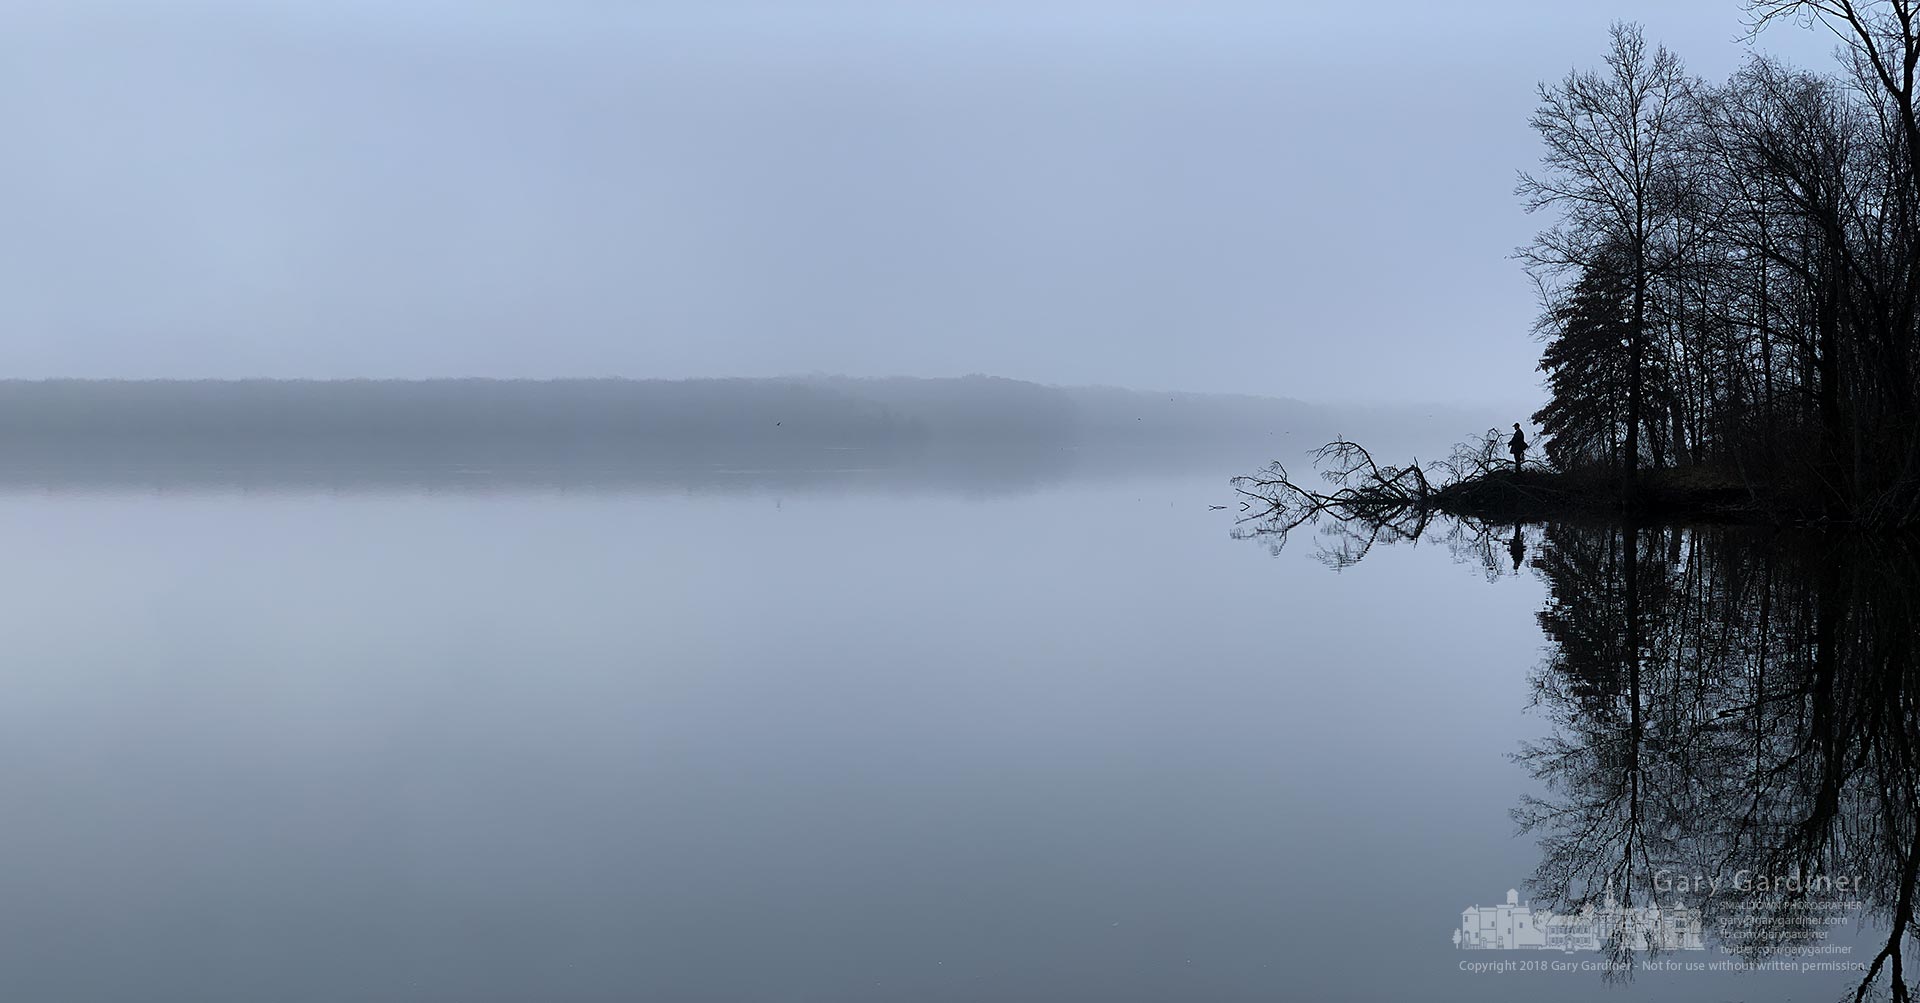 A lone fisherman stands near the end of a point of land jutting out into the morning fog from Red Bank Park early Friday. My Final Photo for Nov. 30, 2018.